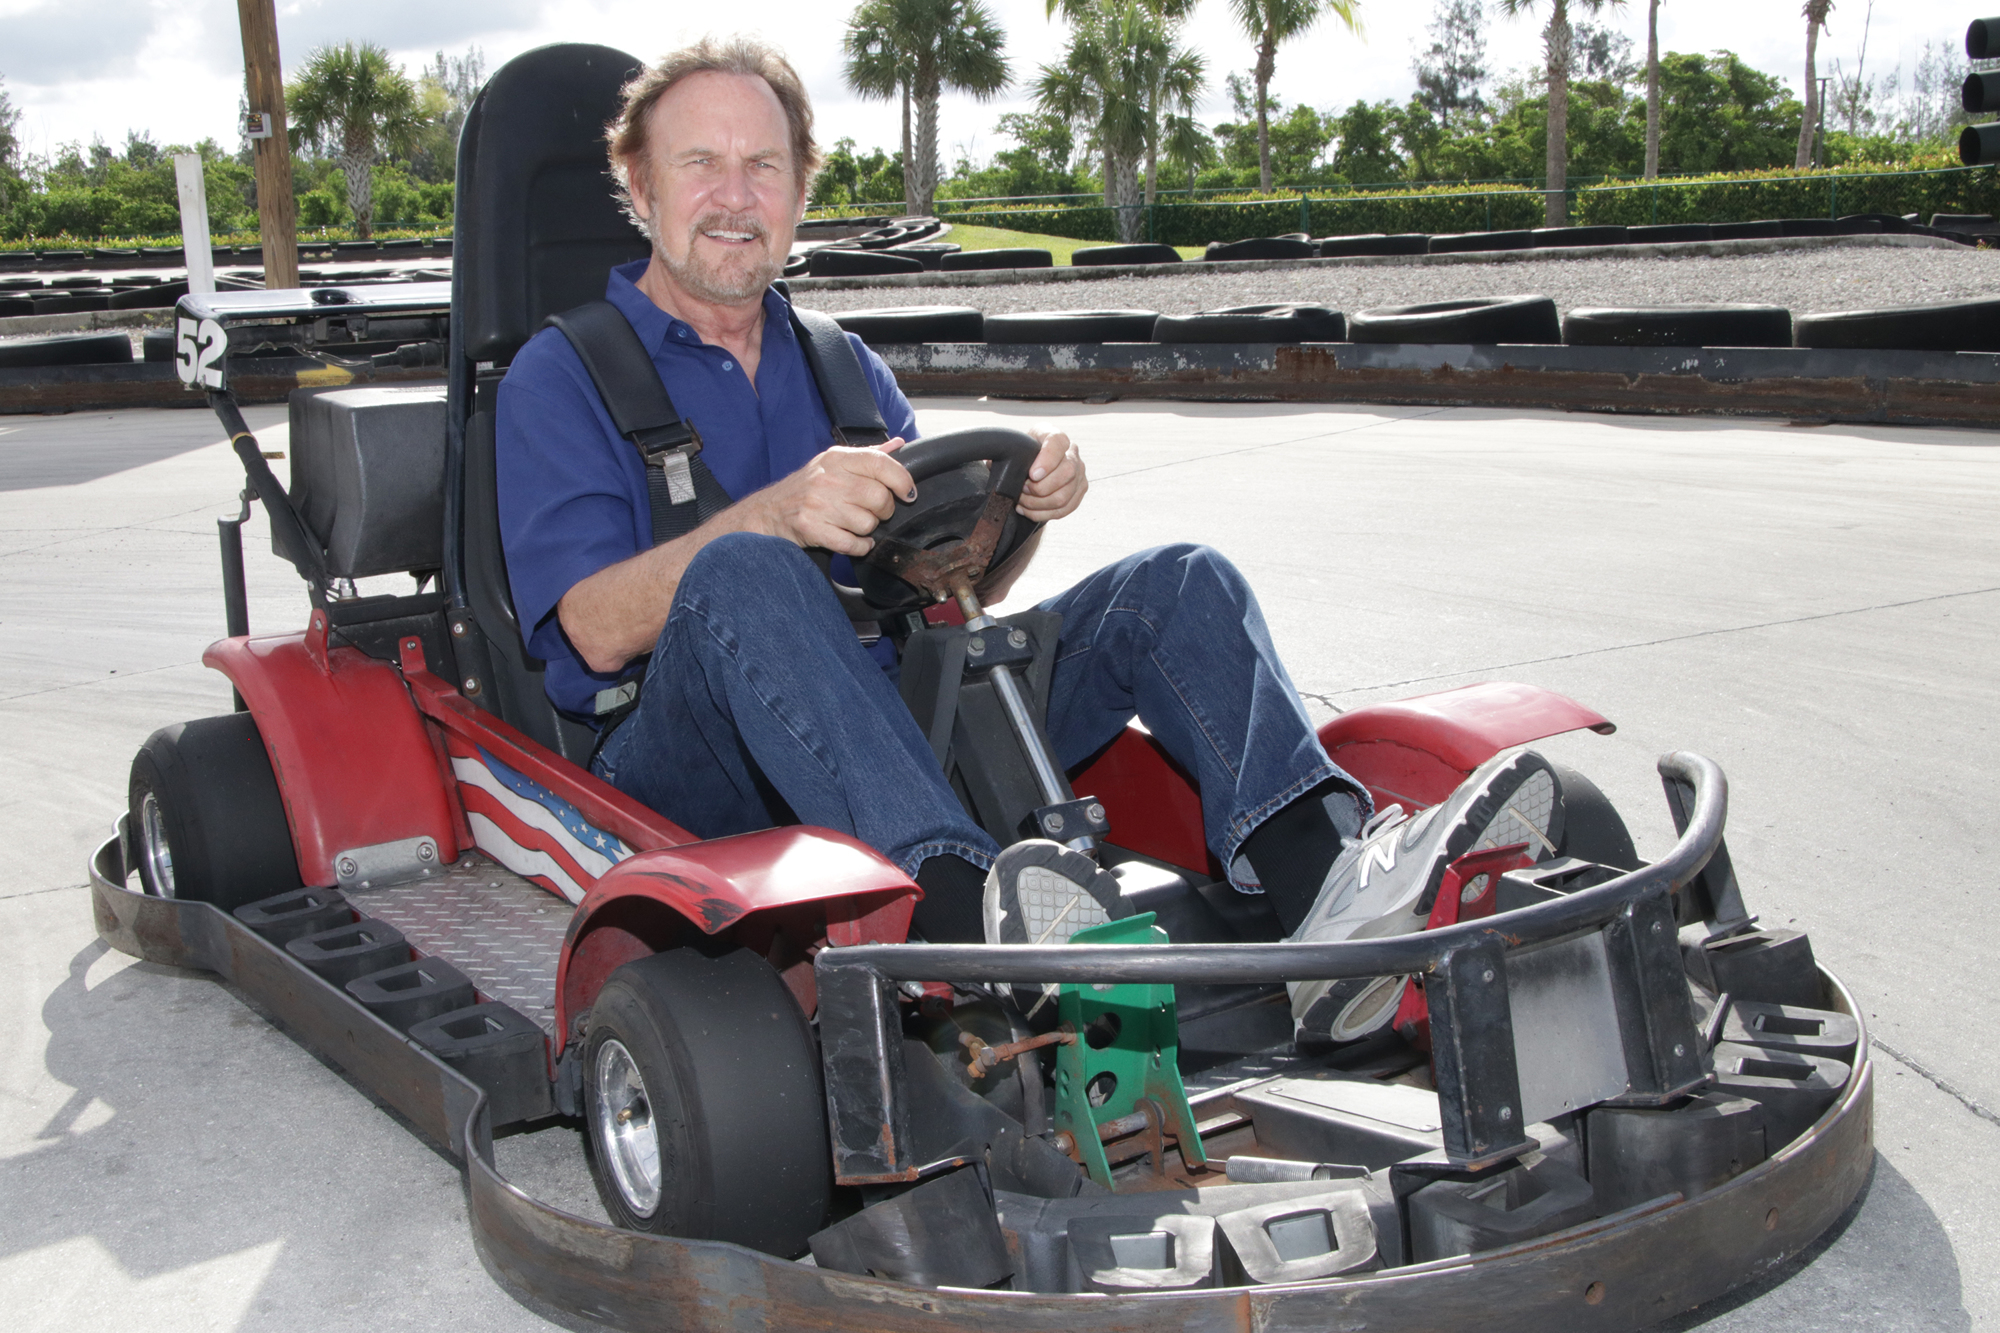 Zoomers is first and foremost a go-kart track, according to Mike Barnes. Jim Jett Photo